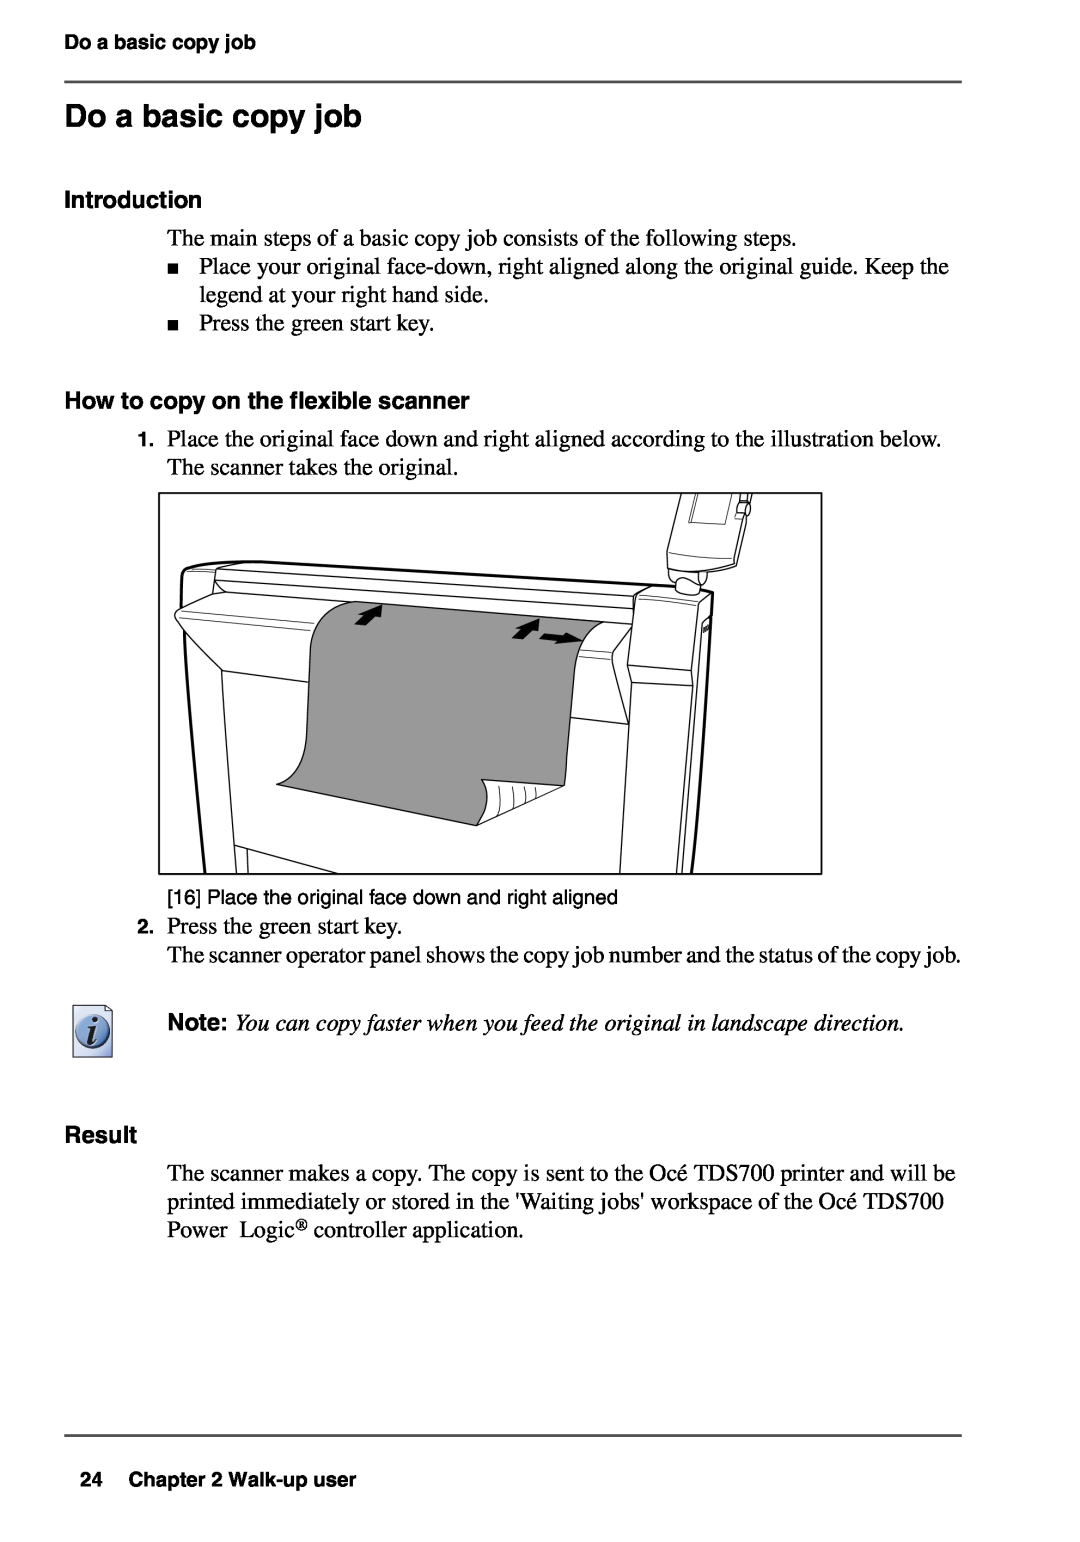 Oce North America TDS700 user manual Do a basic copy job, How to copy on the flexible scanner, Result, Introduction 